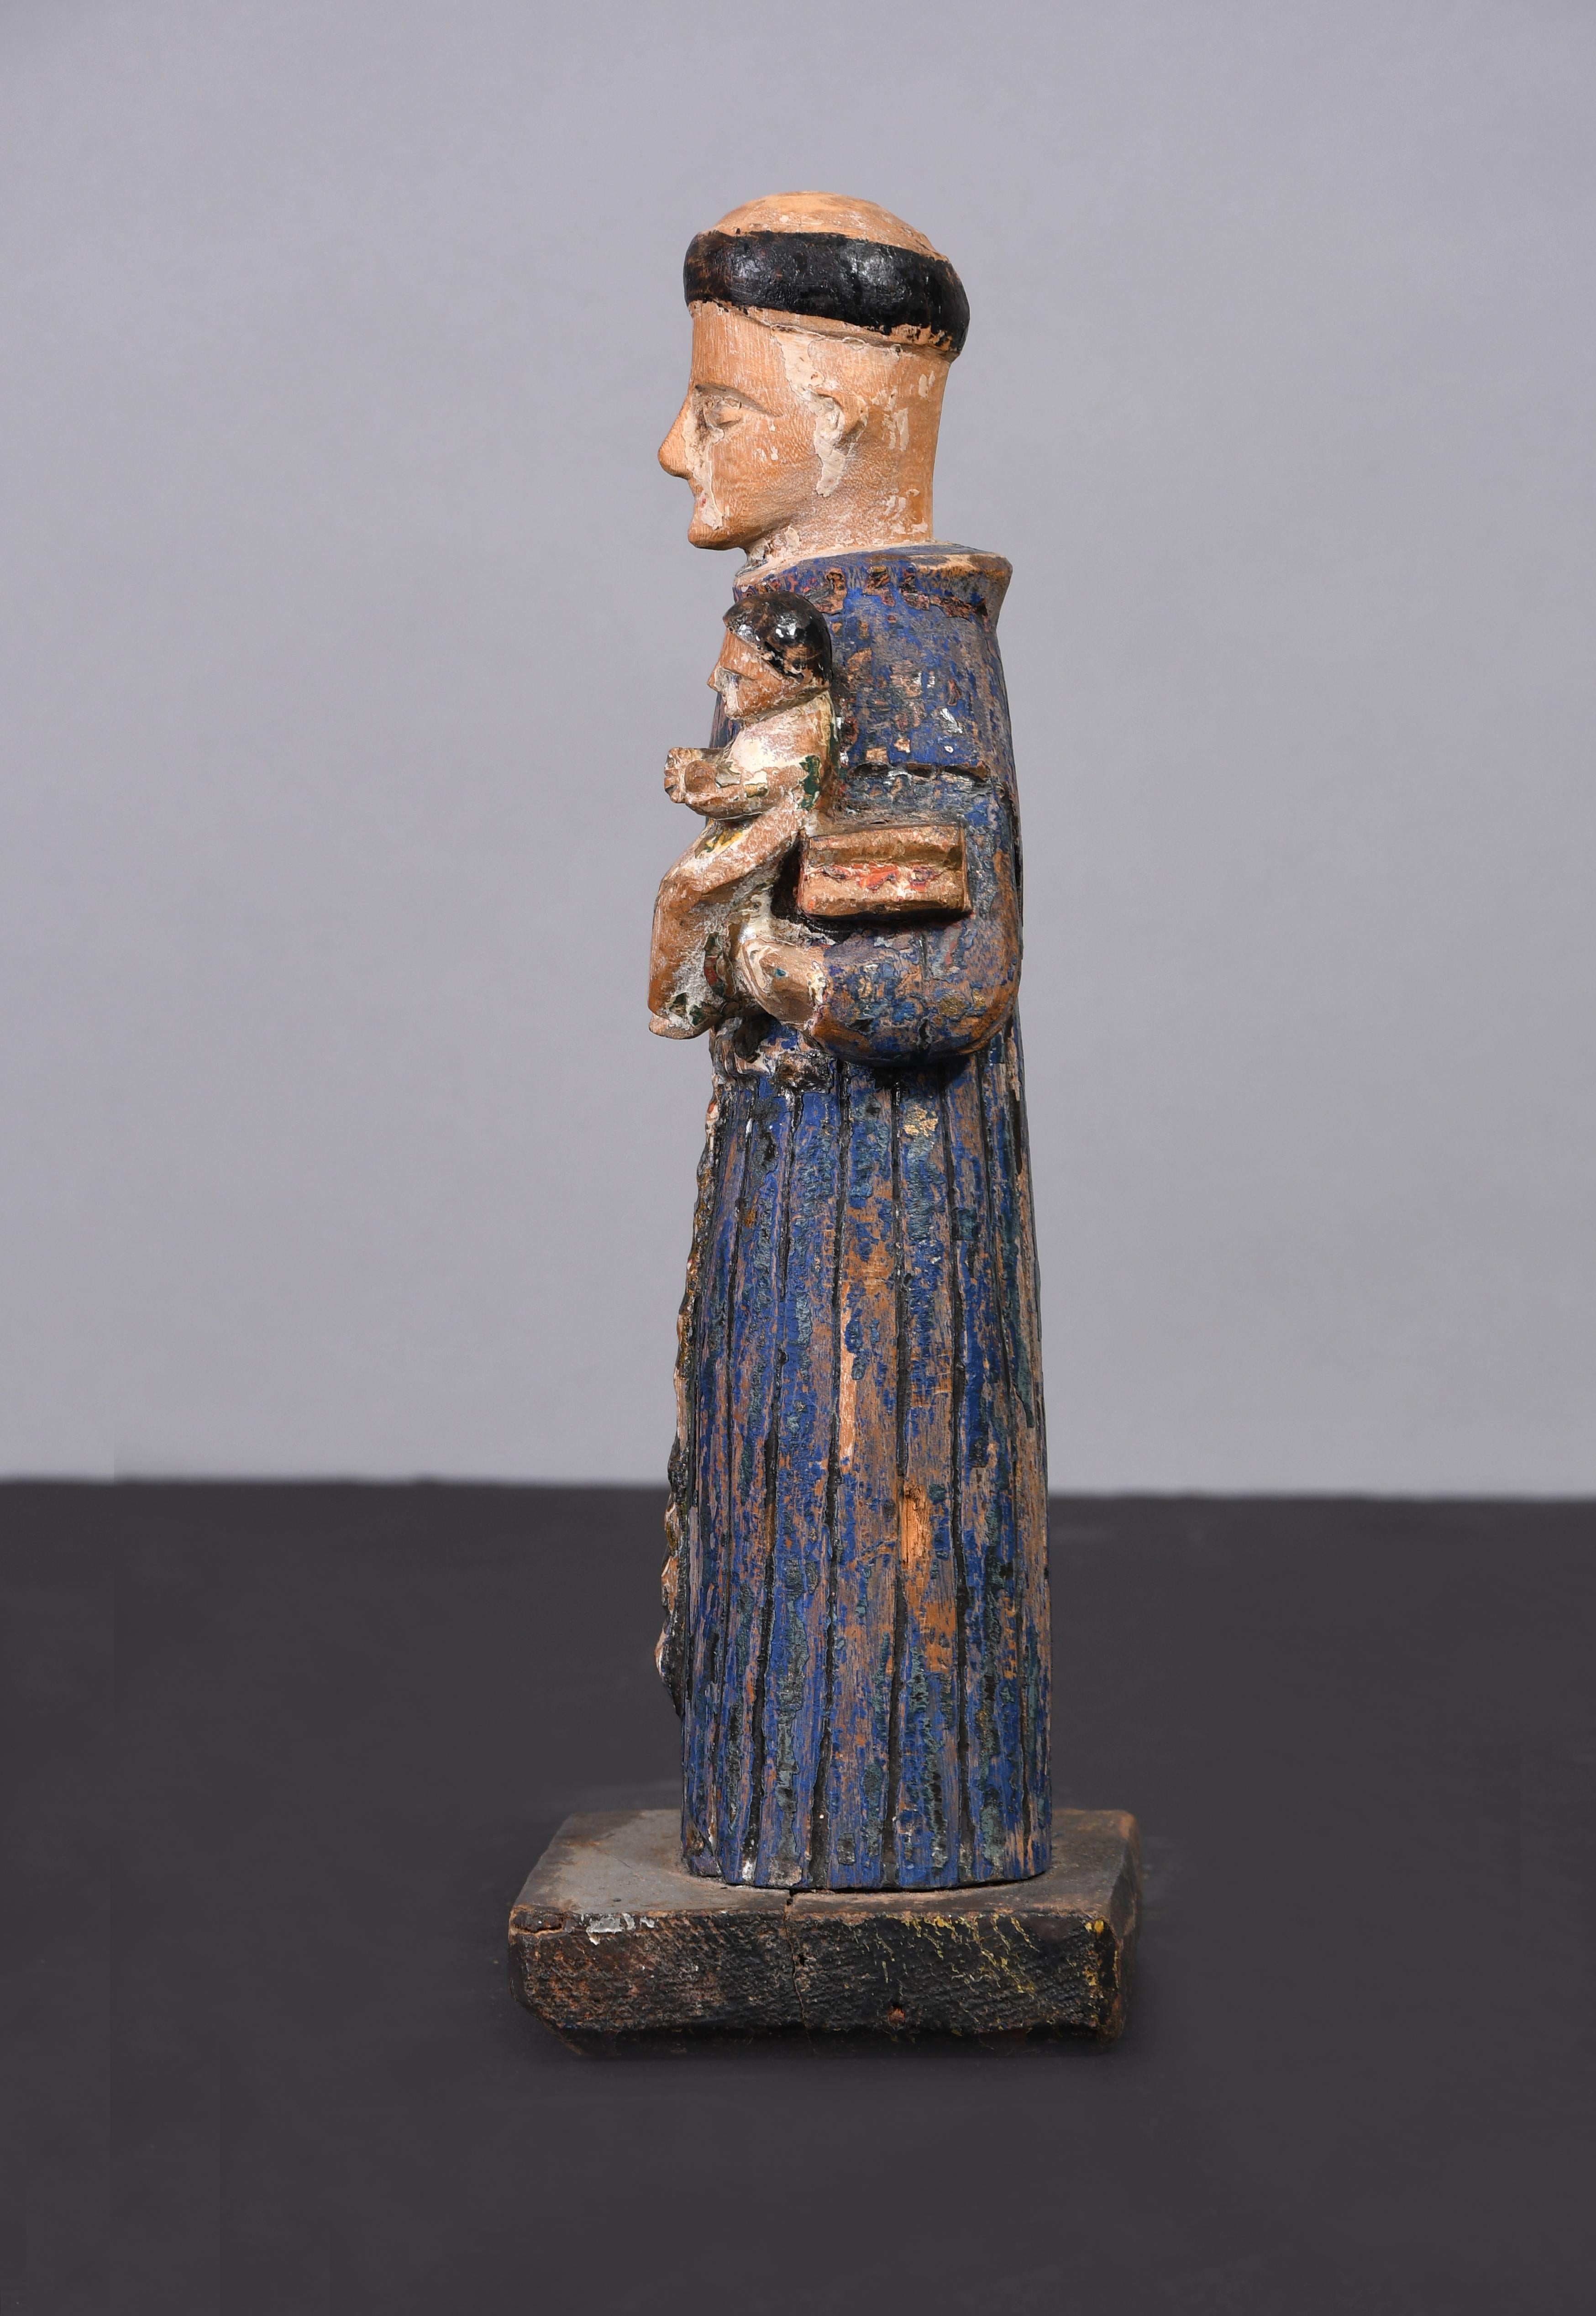 Antique carved sculpture of San Antonio made in Puerto Rico by re-known wood carver from Mayaguez, Pepe Ramos. The saint is dressed with a typical Franciscan order blue cassock and rope. It can be admire the reeded work of the rope and the bottom